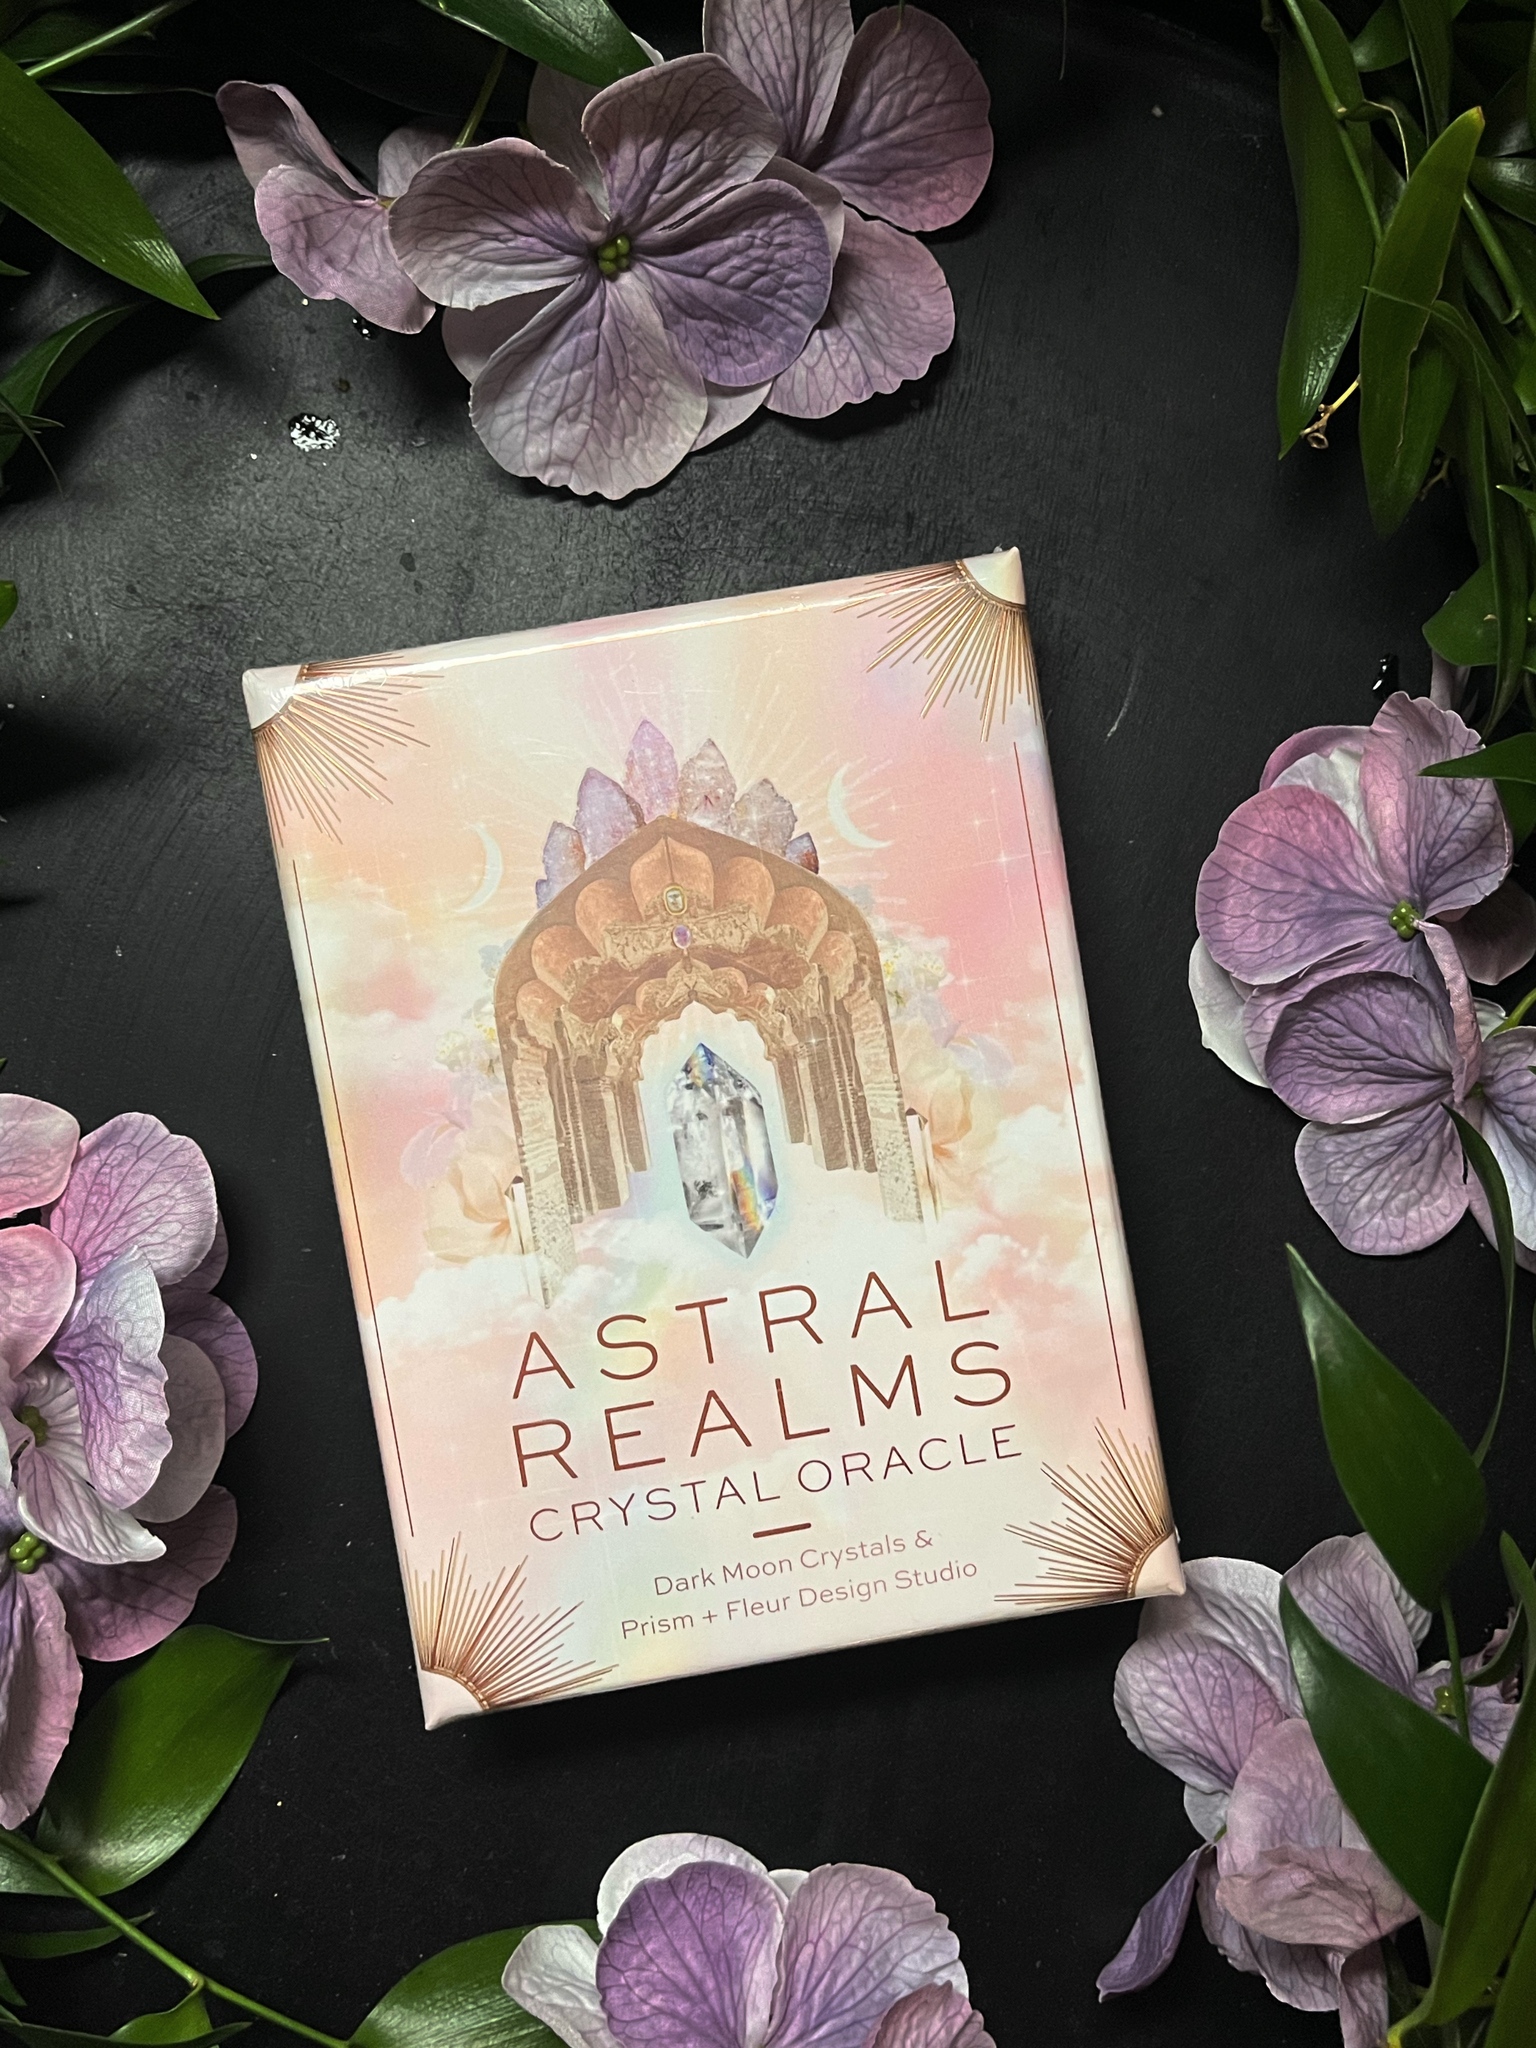 Astral realm crystal oracle